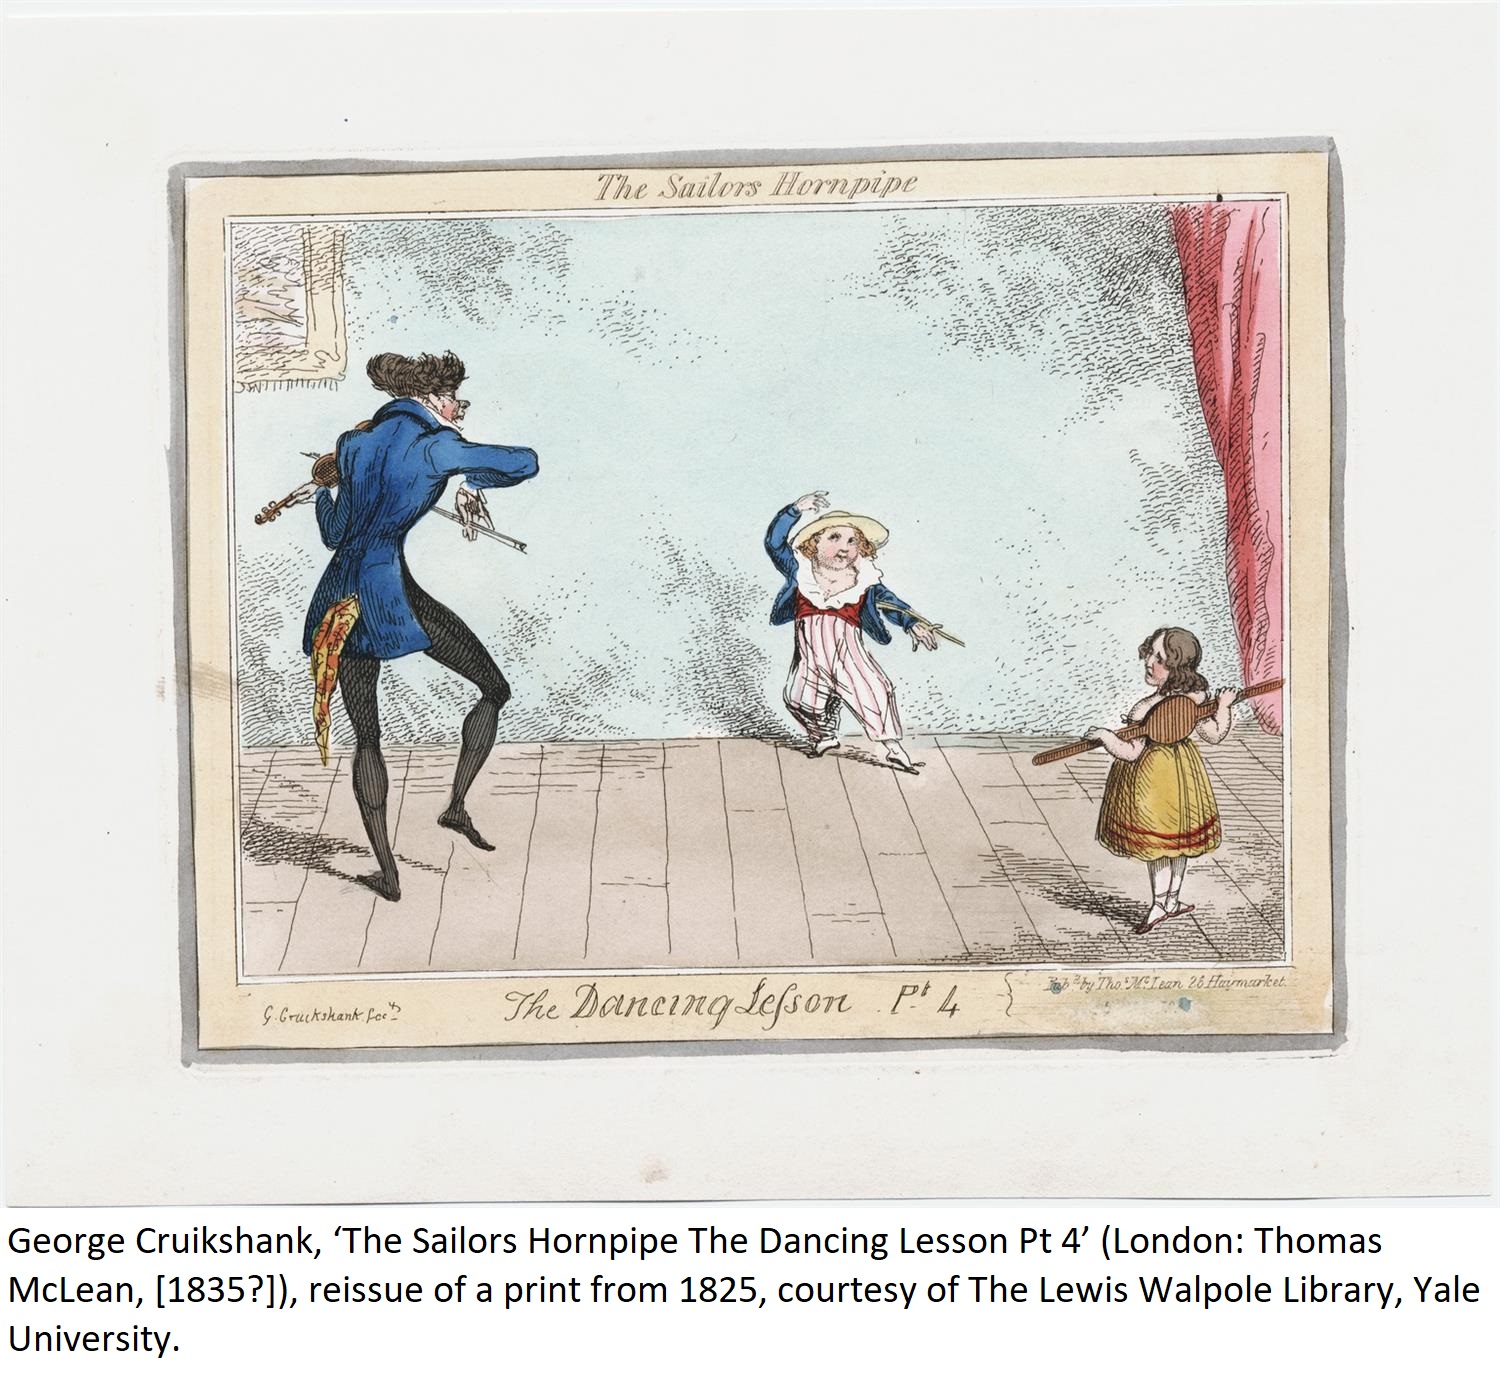 George Cruikshank, ‘The Sailors Hornpipe The Dancing Lesson Pt 4’ (London: Thomas McLean, [1835?]), reissue of a print from 1825, courtesy of The Lewis Walpole Library, Yale University.